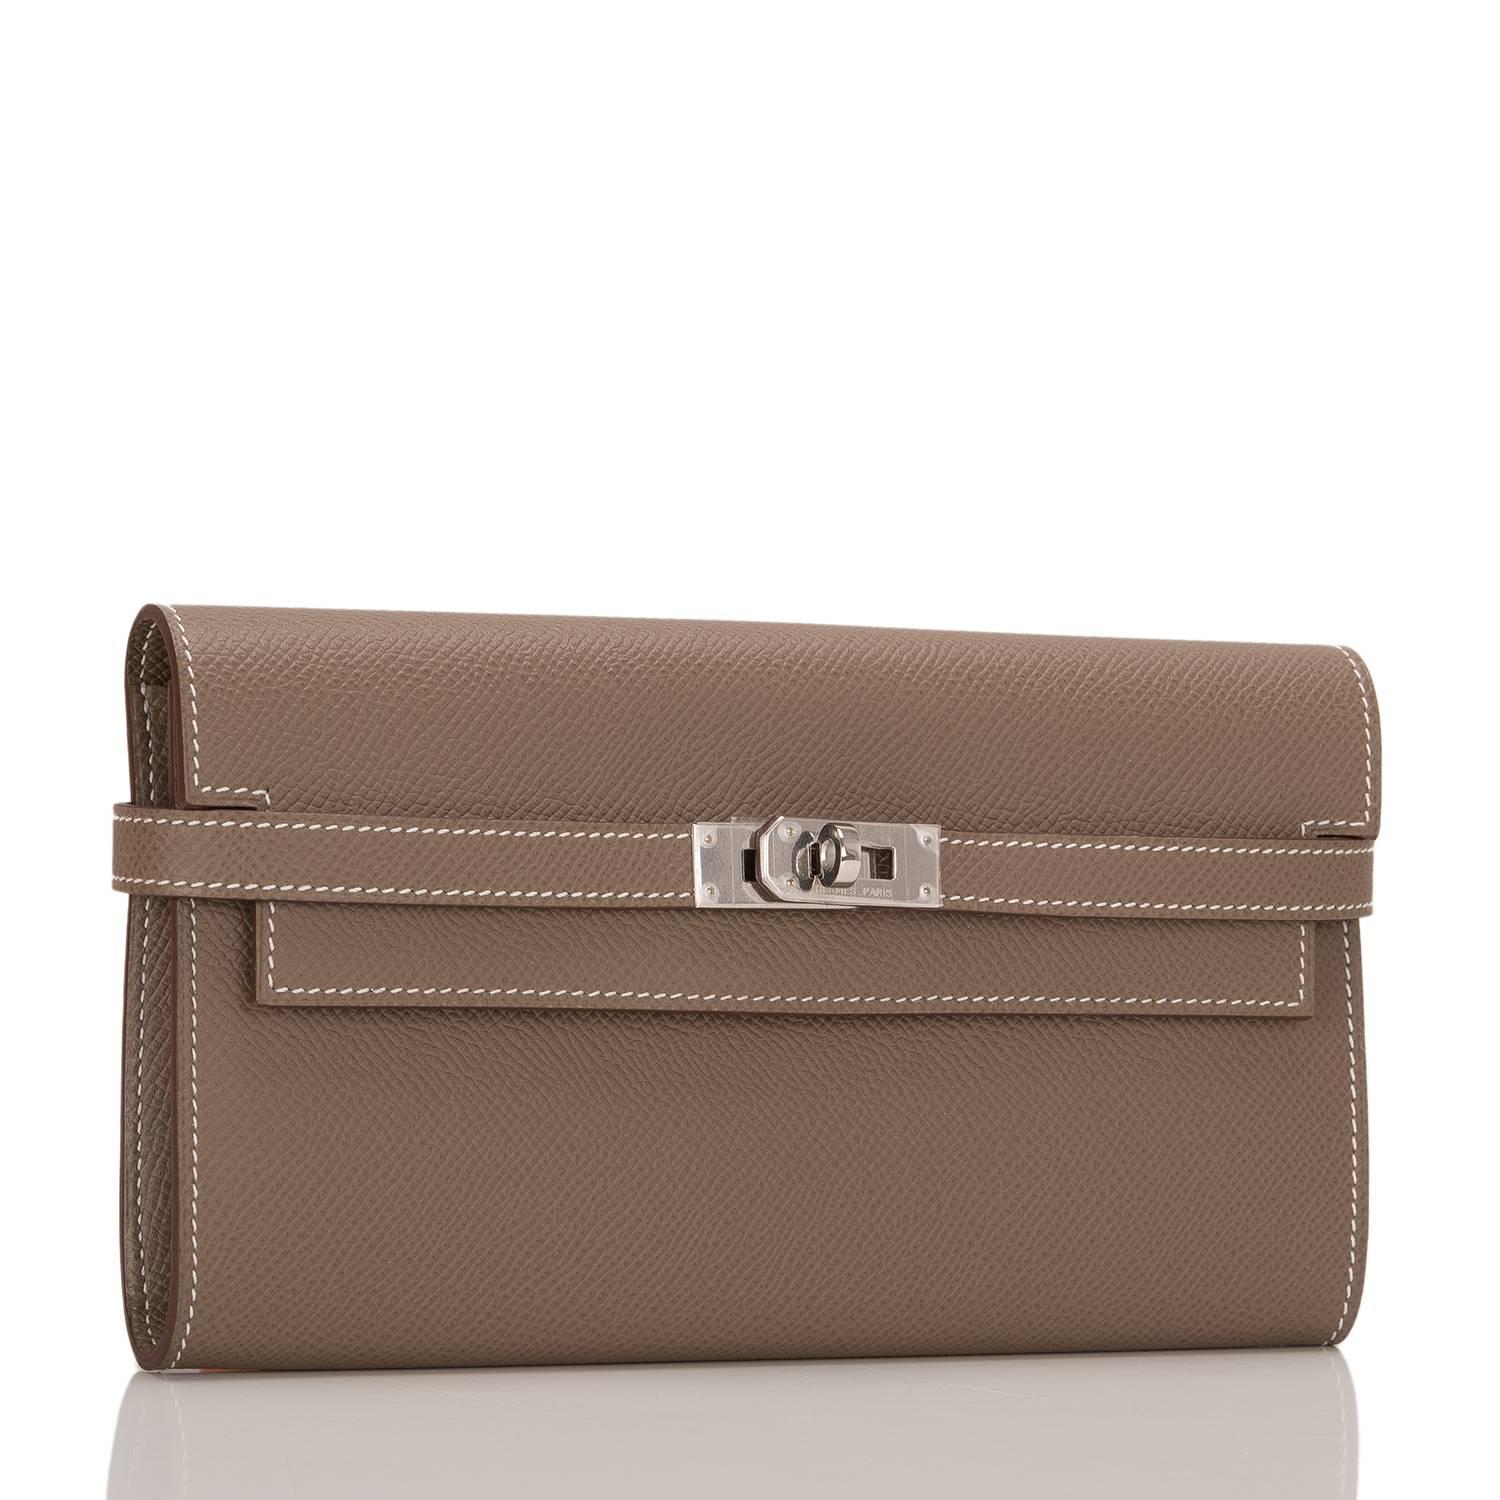  	
Hermes Etoupe Epsom leather Kelly Longue Wallet with palladium hardware.

This style features white contrast stitching, palladium hardware, two front straps and front toggle closure.

The interior is lined in Etoupe chevre leather and